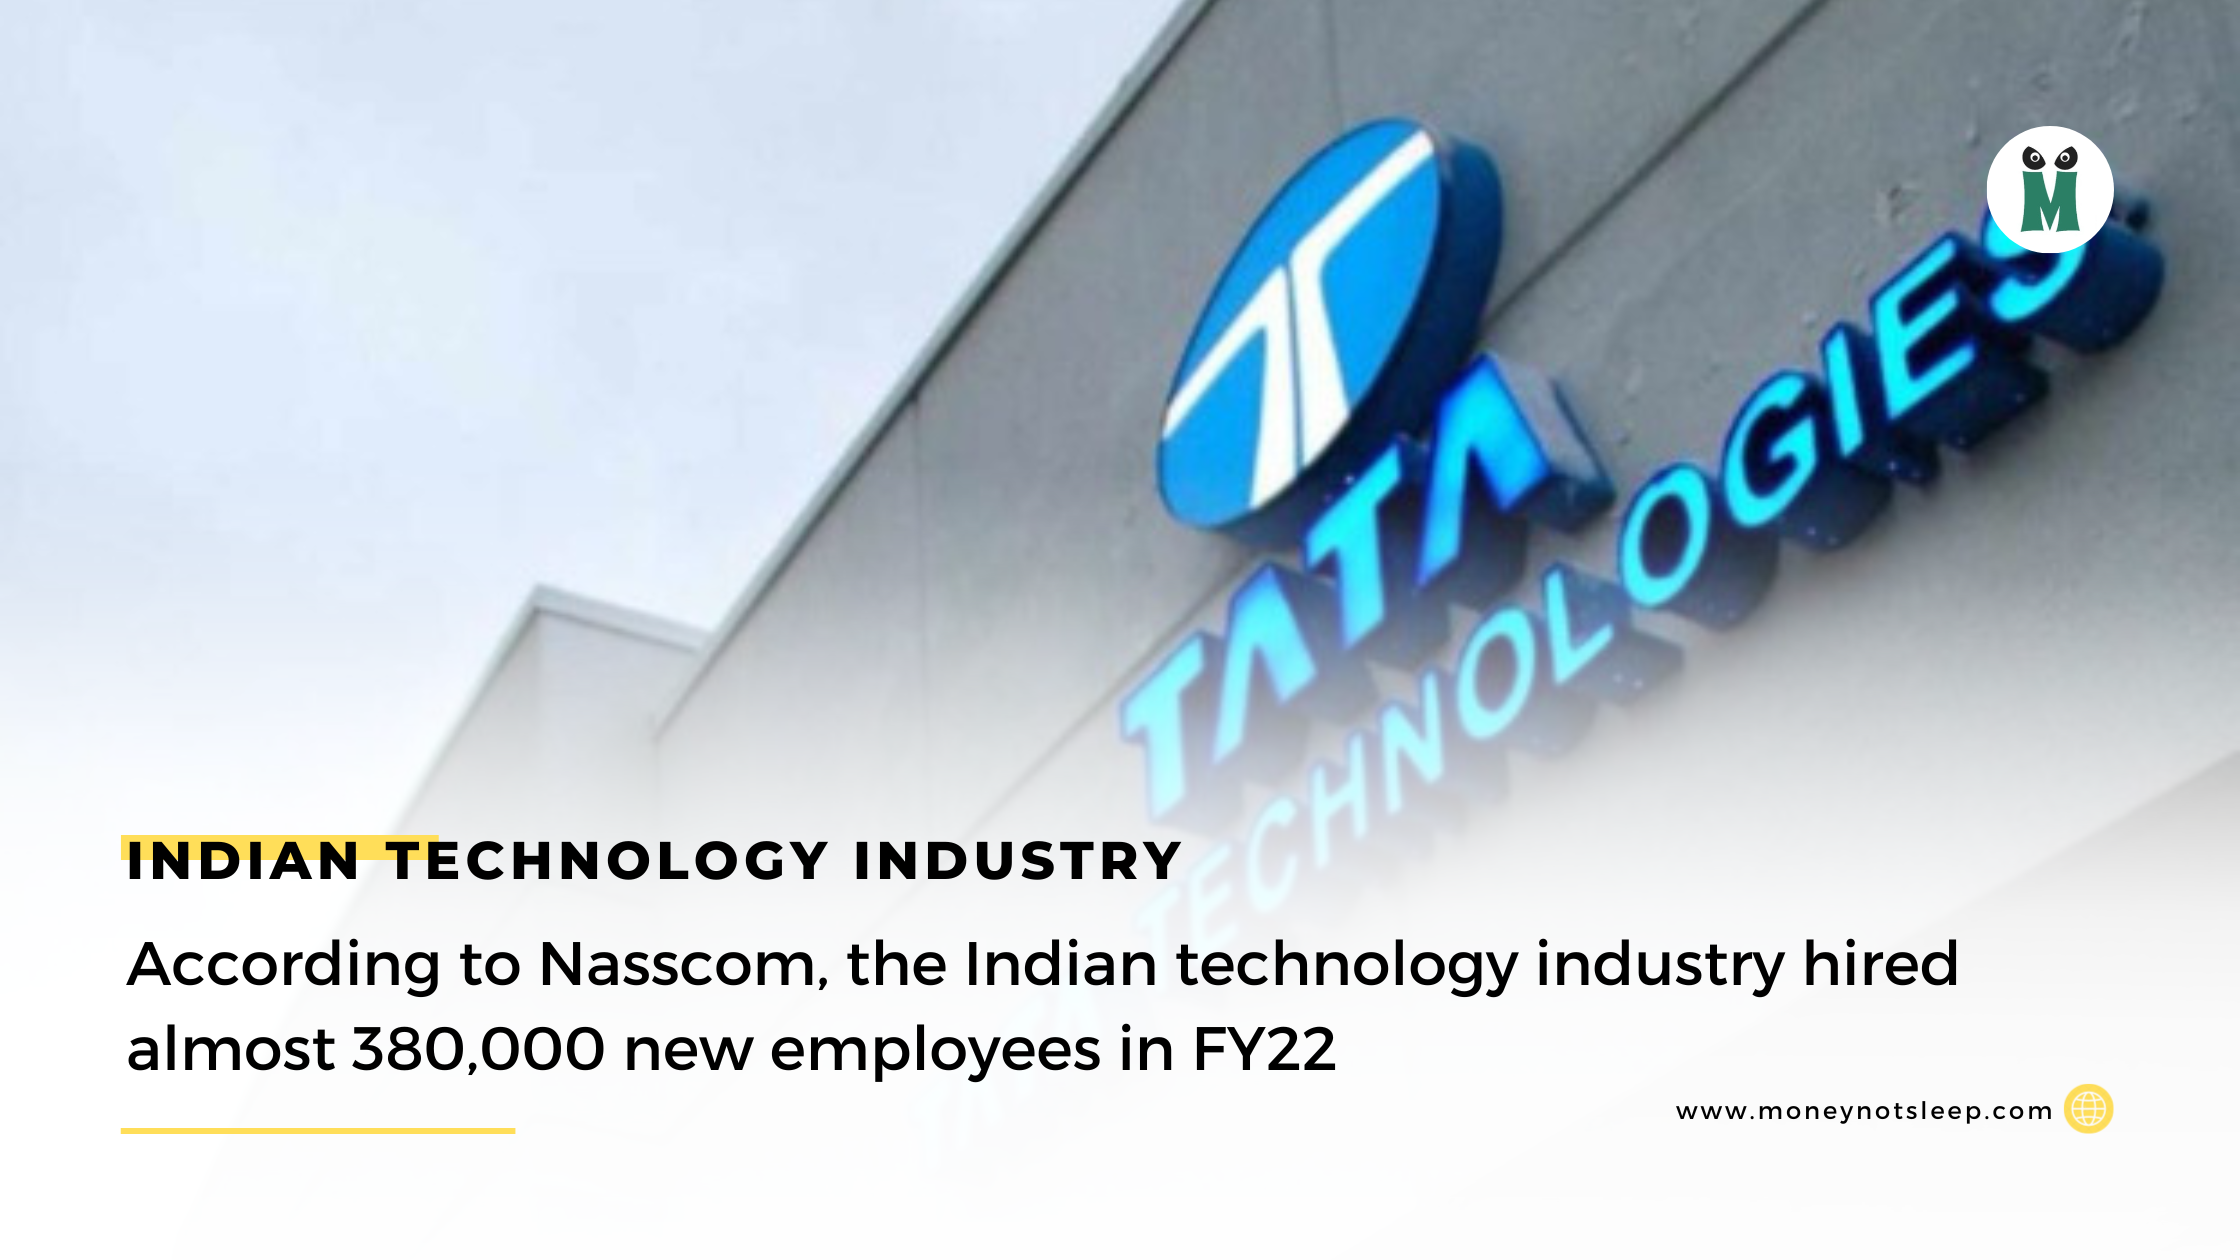 According to Nasscom, the Indian technology industry hired almost 380,000 new employees in FY22